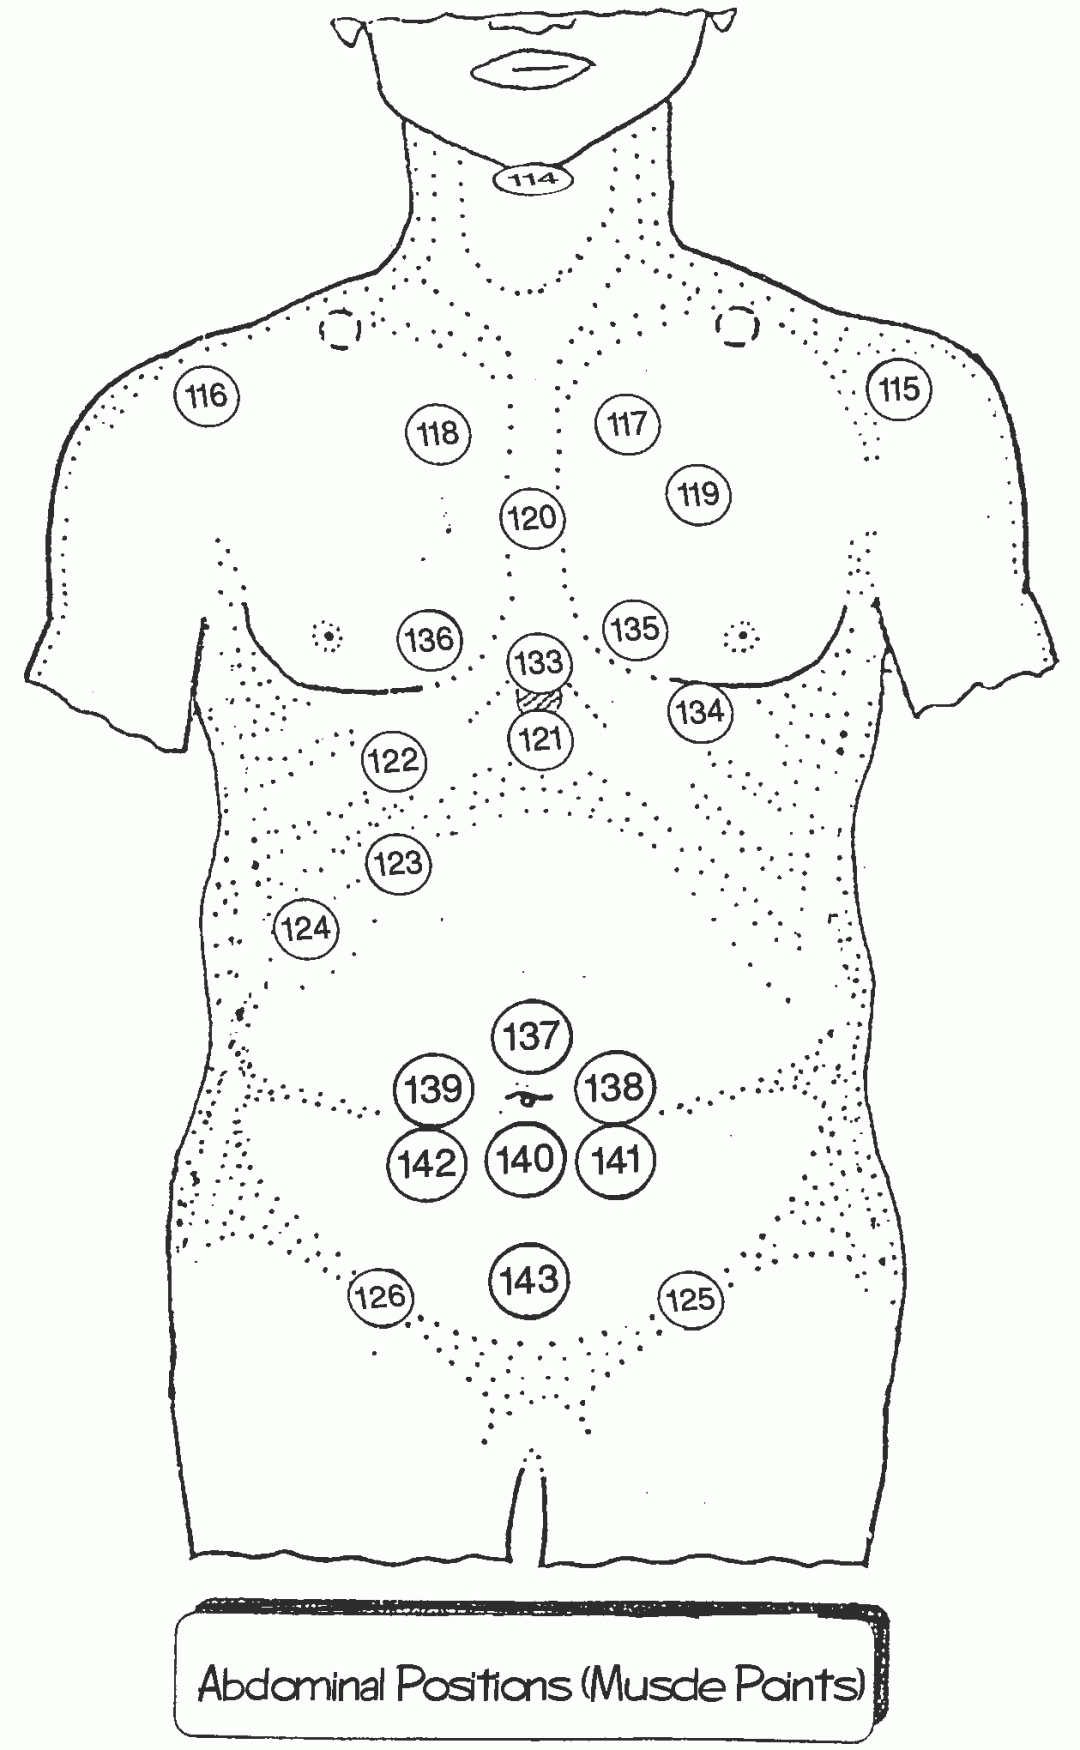 Locating Hijama points on the front of the body